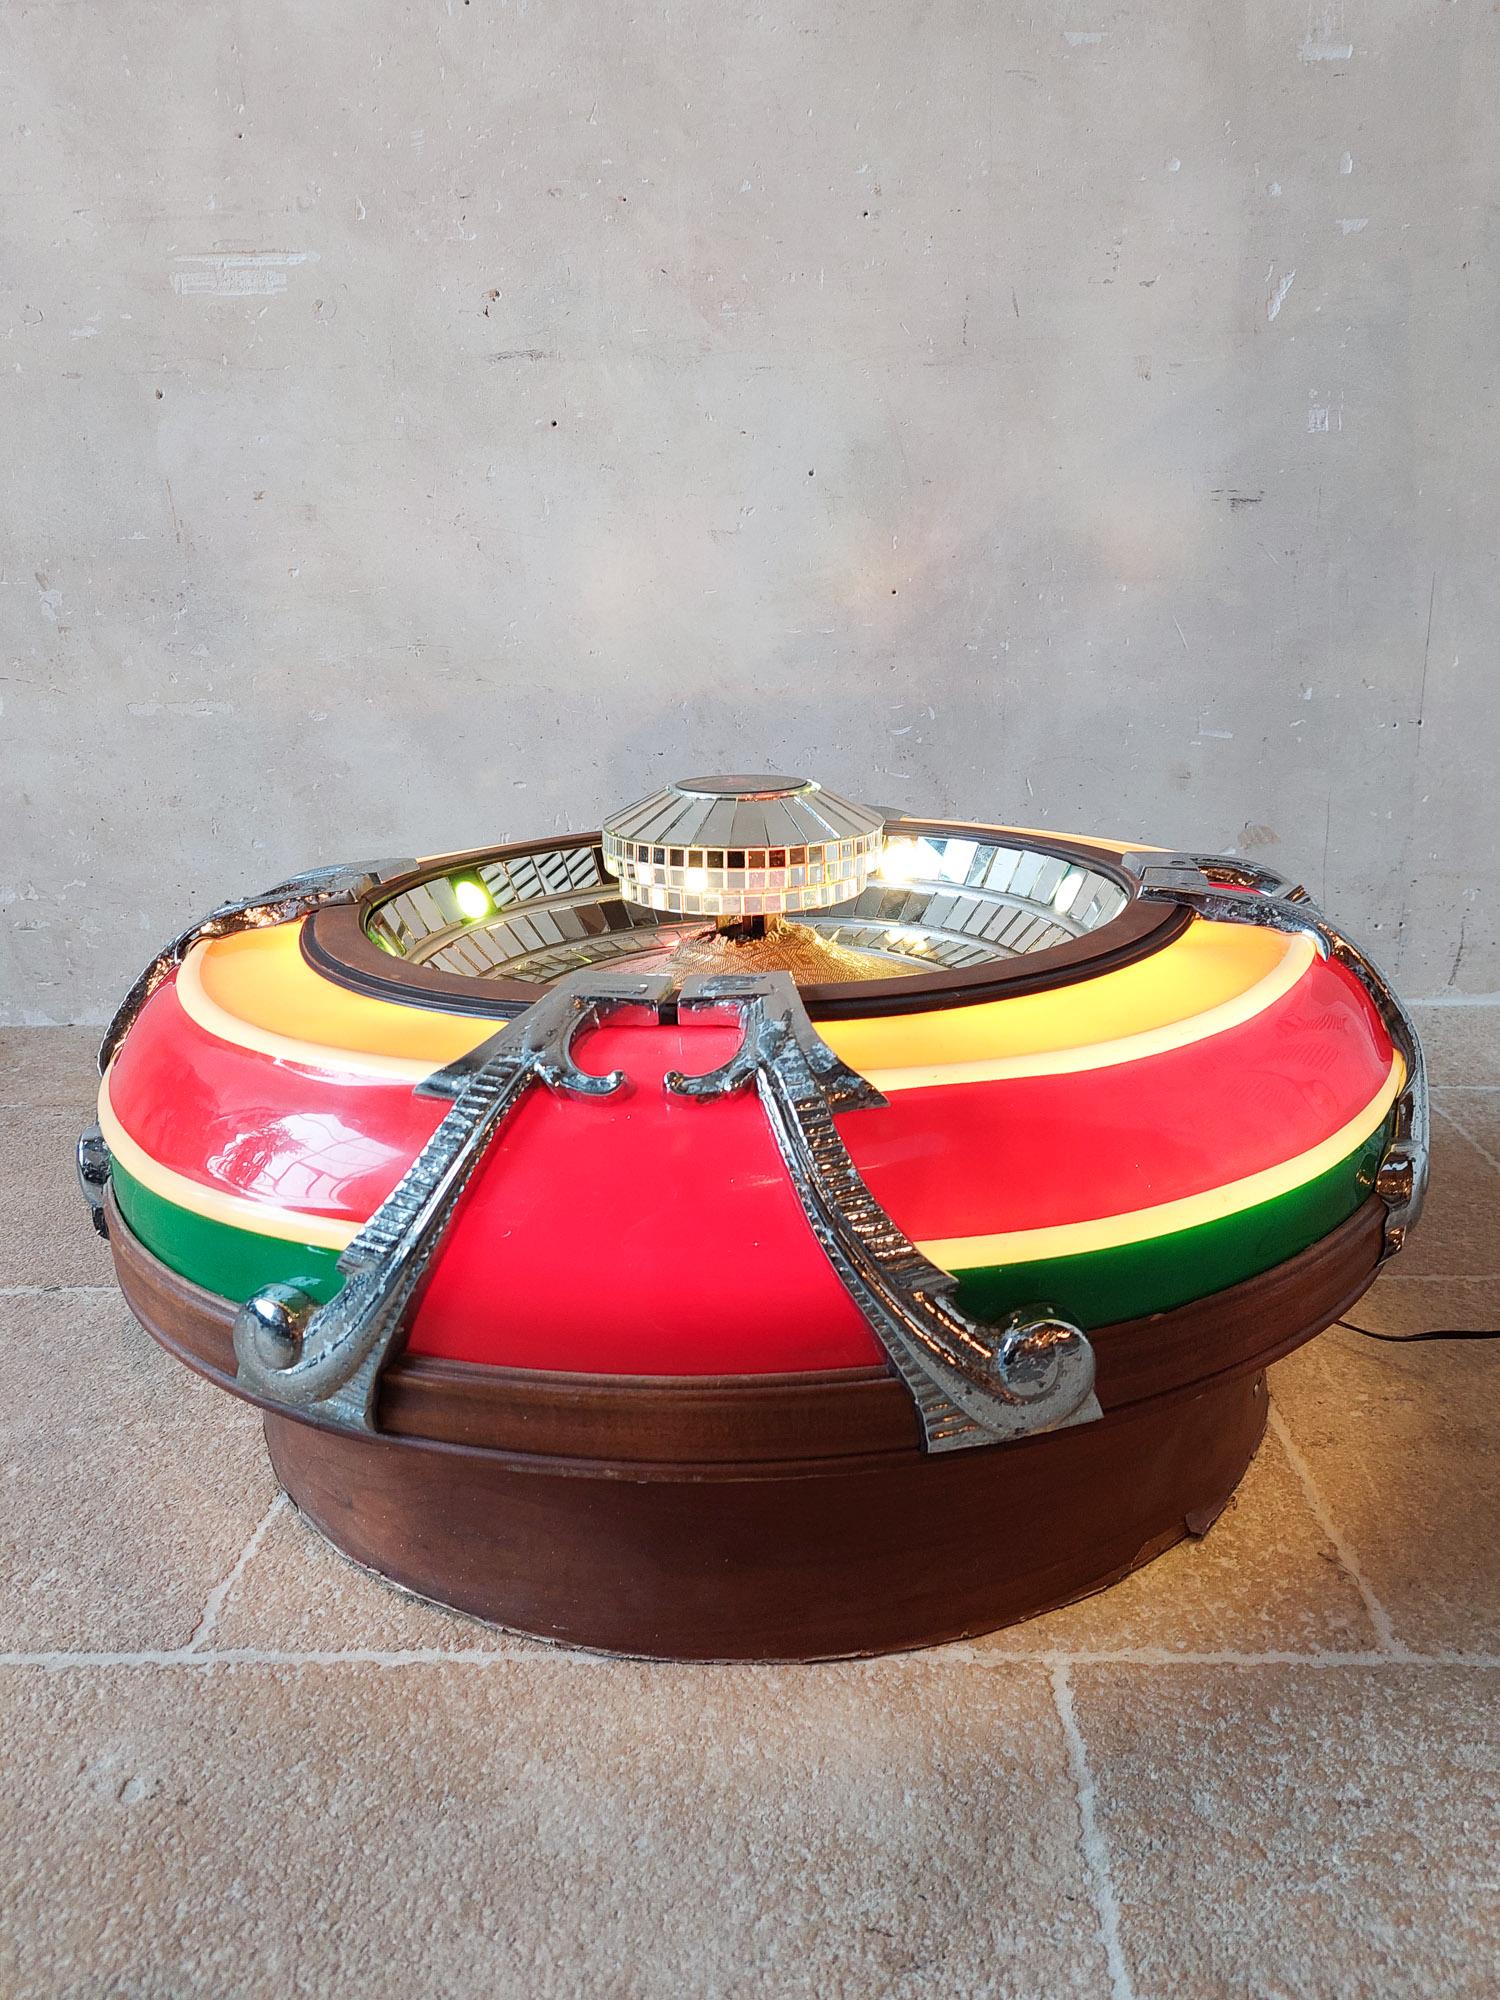 Special Wurlitzer sound speaker. Wurlitzer 4008 (for your Jukebox), 20th century.

Suitable for wall and ceiling mounting. With disco coloured lighting and mirrors for a beautiful play of colours.

Diameter ± 90 cm, height ± 40 cm

The Rudolph